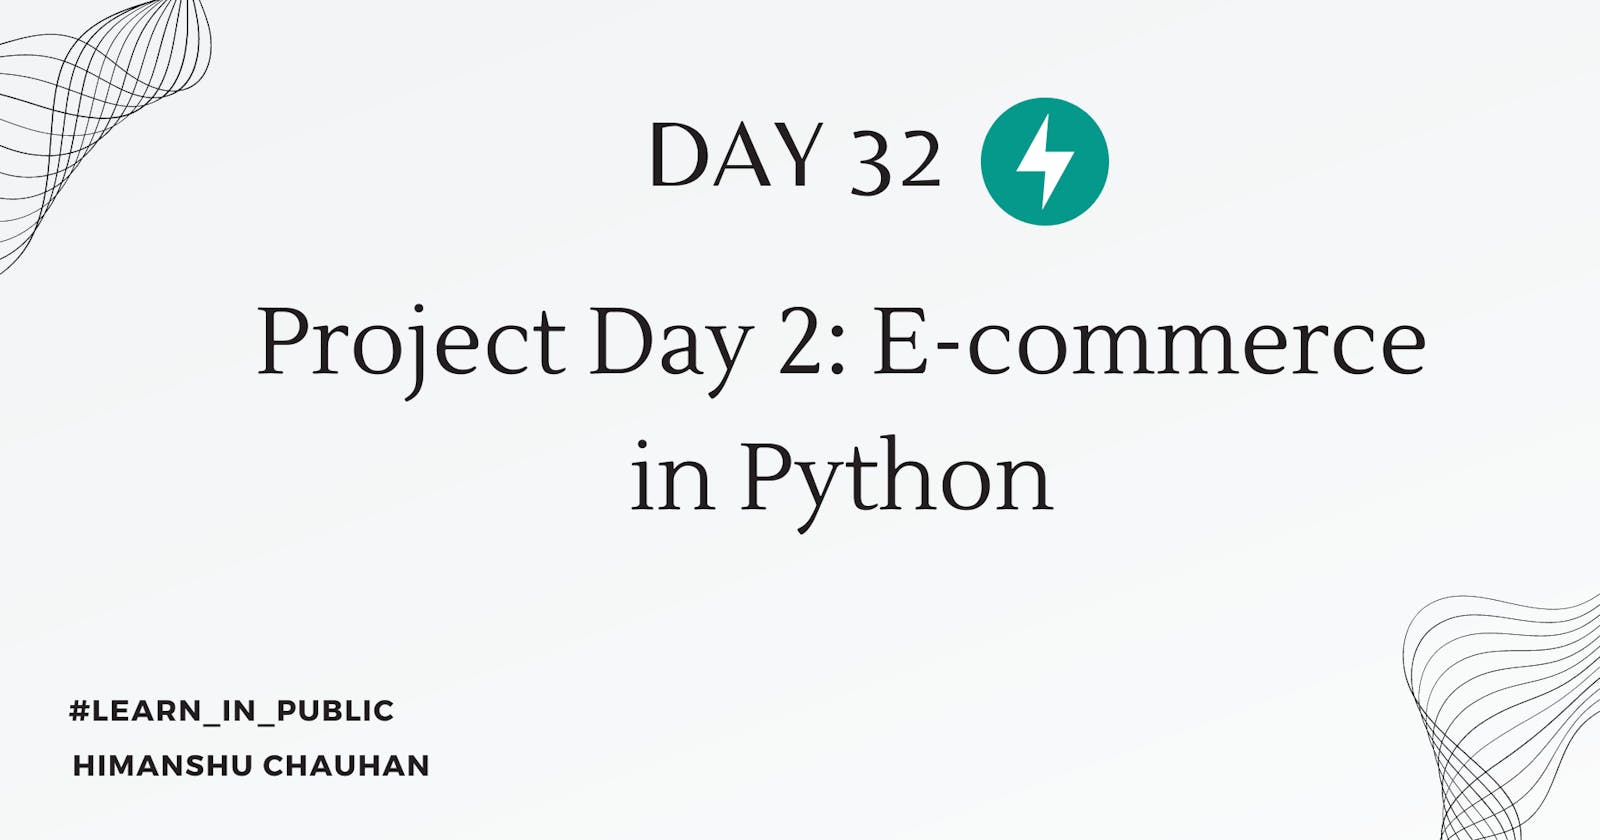 Day 32: E-commerce project Day 2